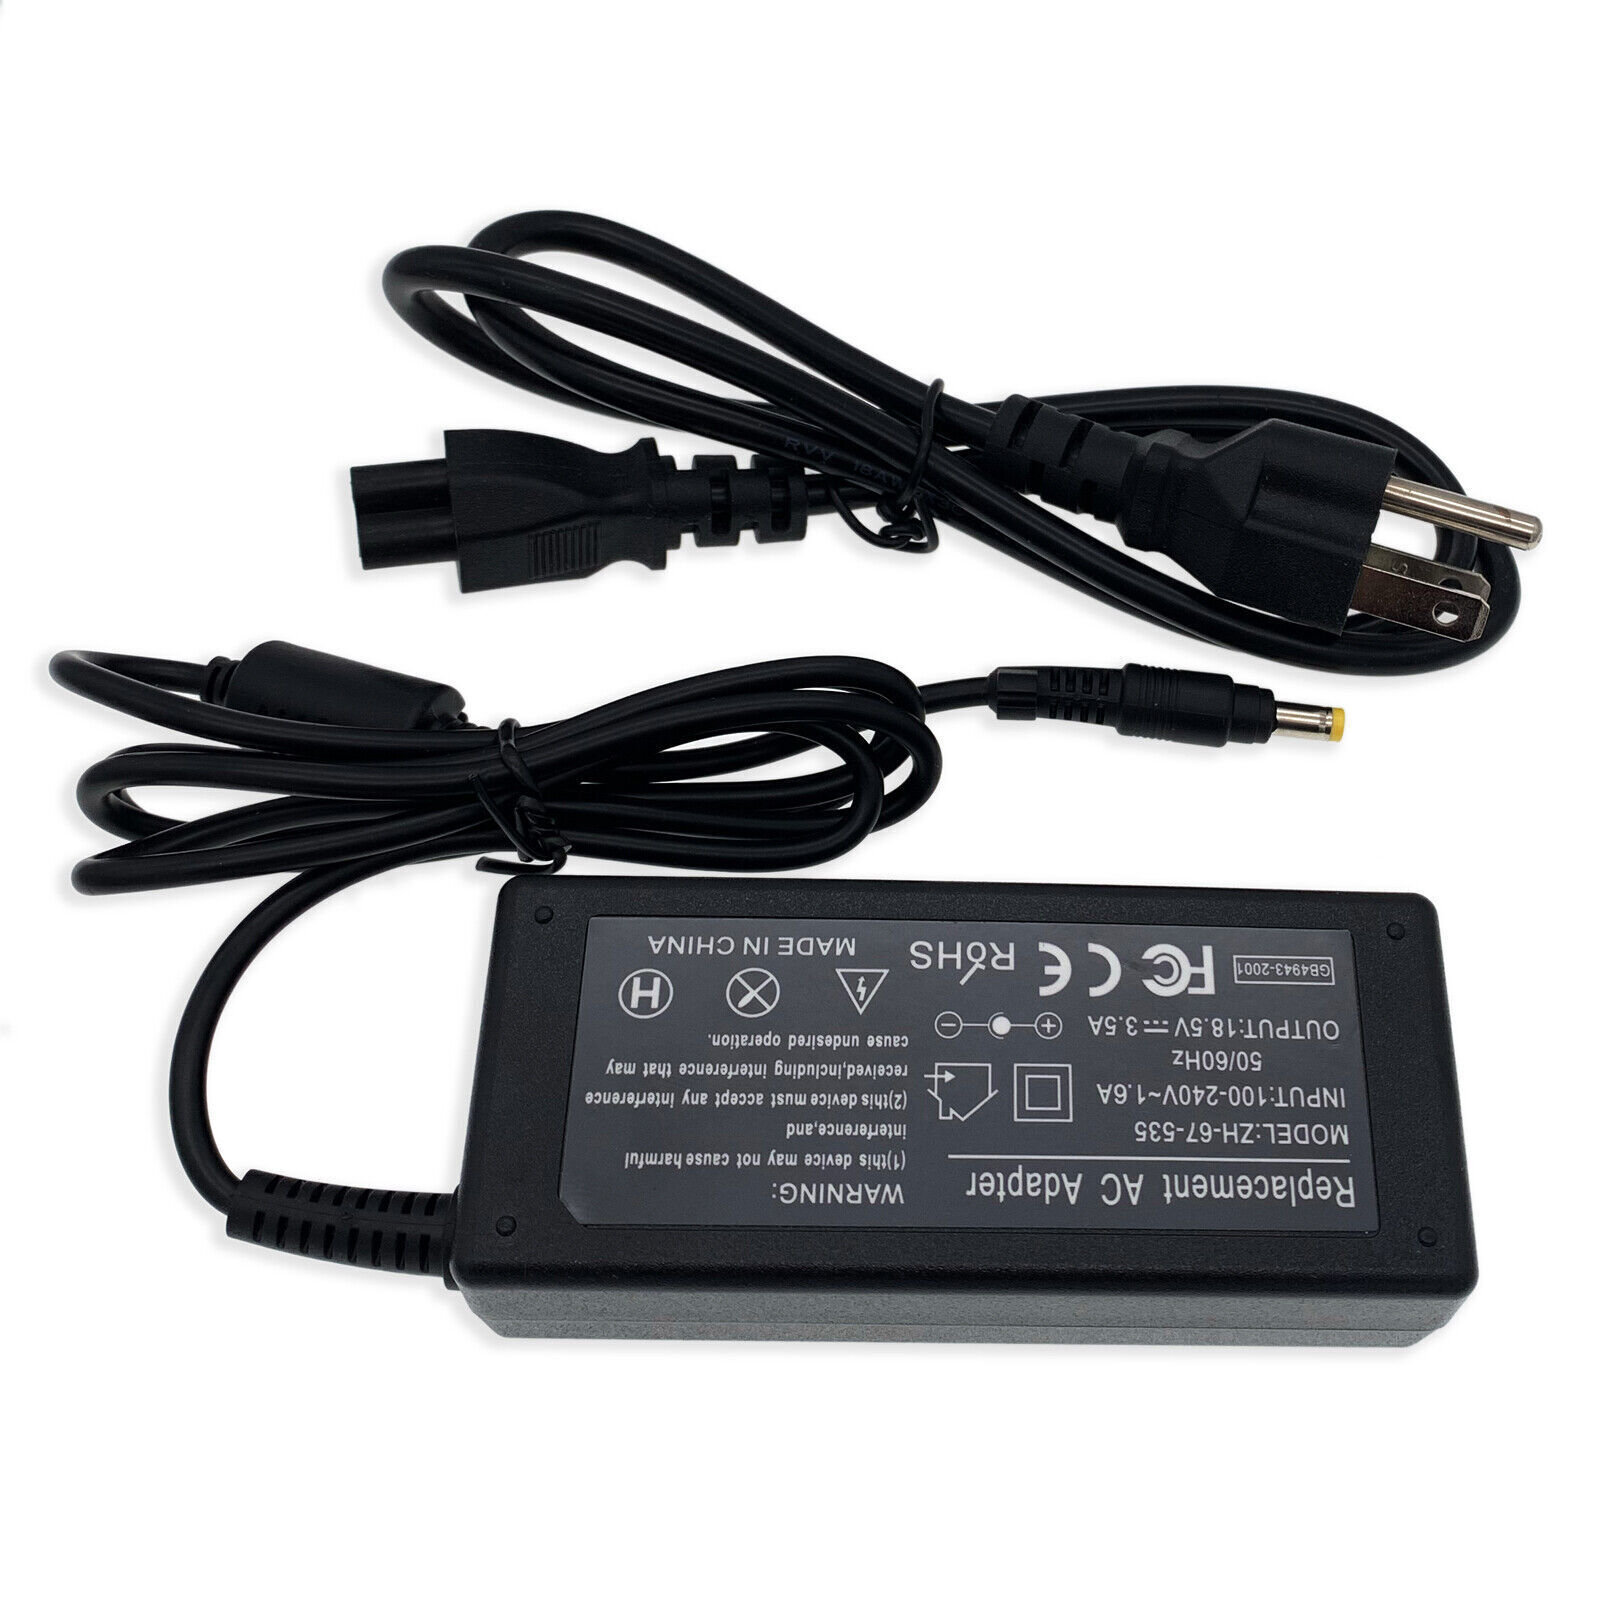 For HP G7000 COMPAQ 6720S 6820S 530 550 550 620 625 Laptop AC Adapter Charger